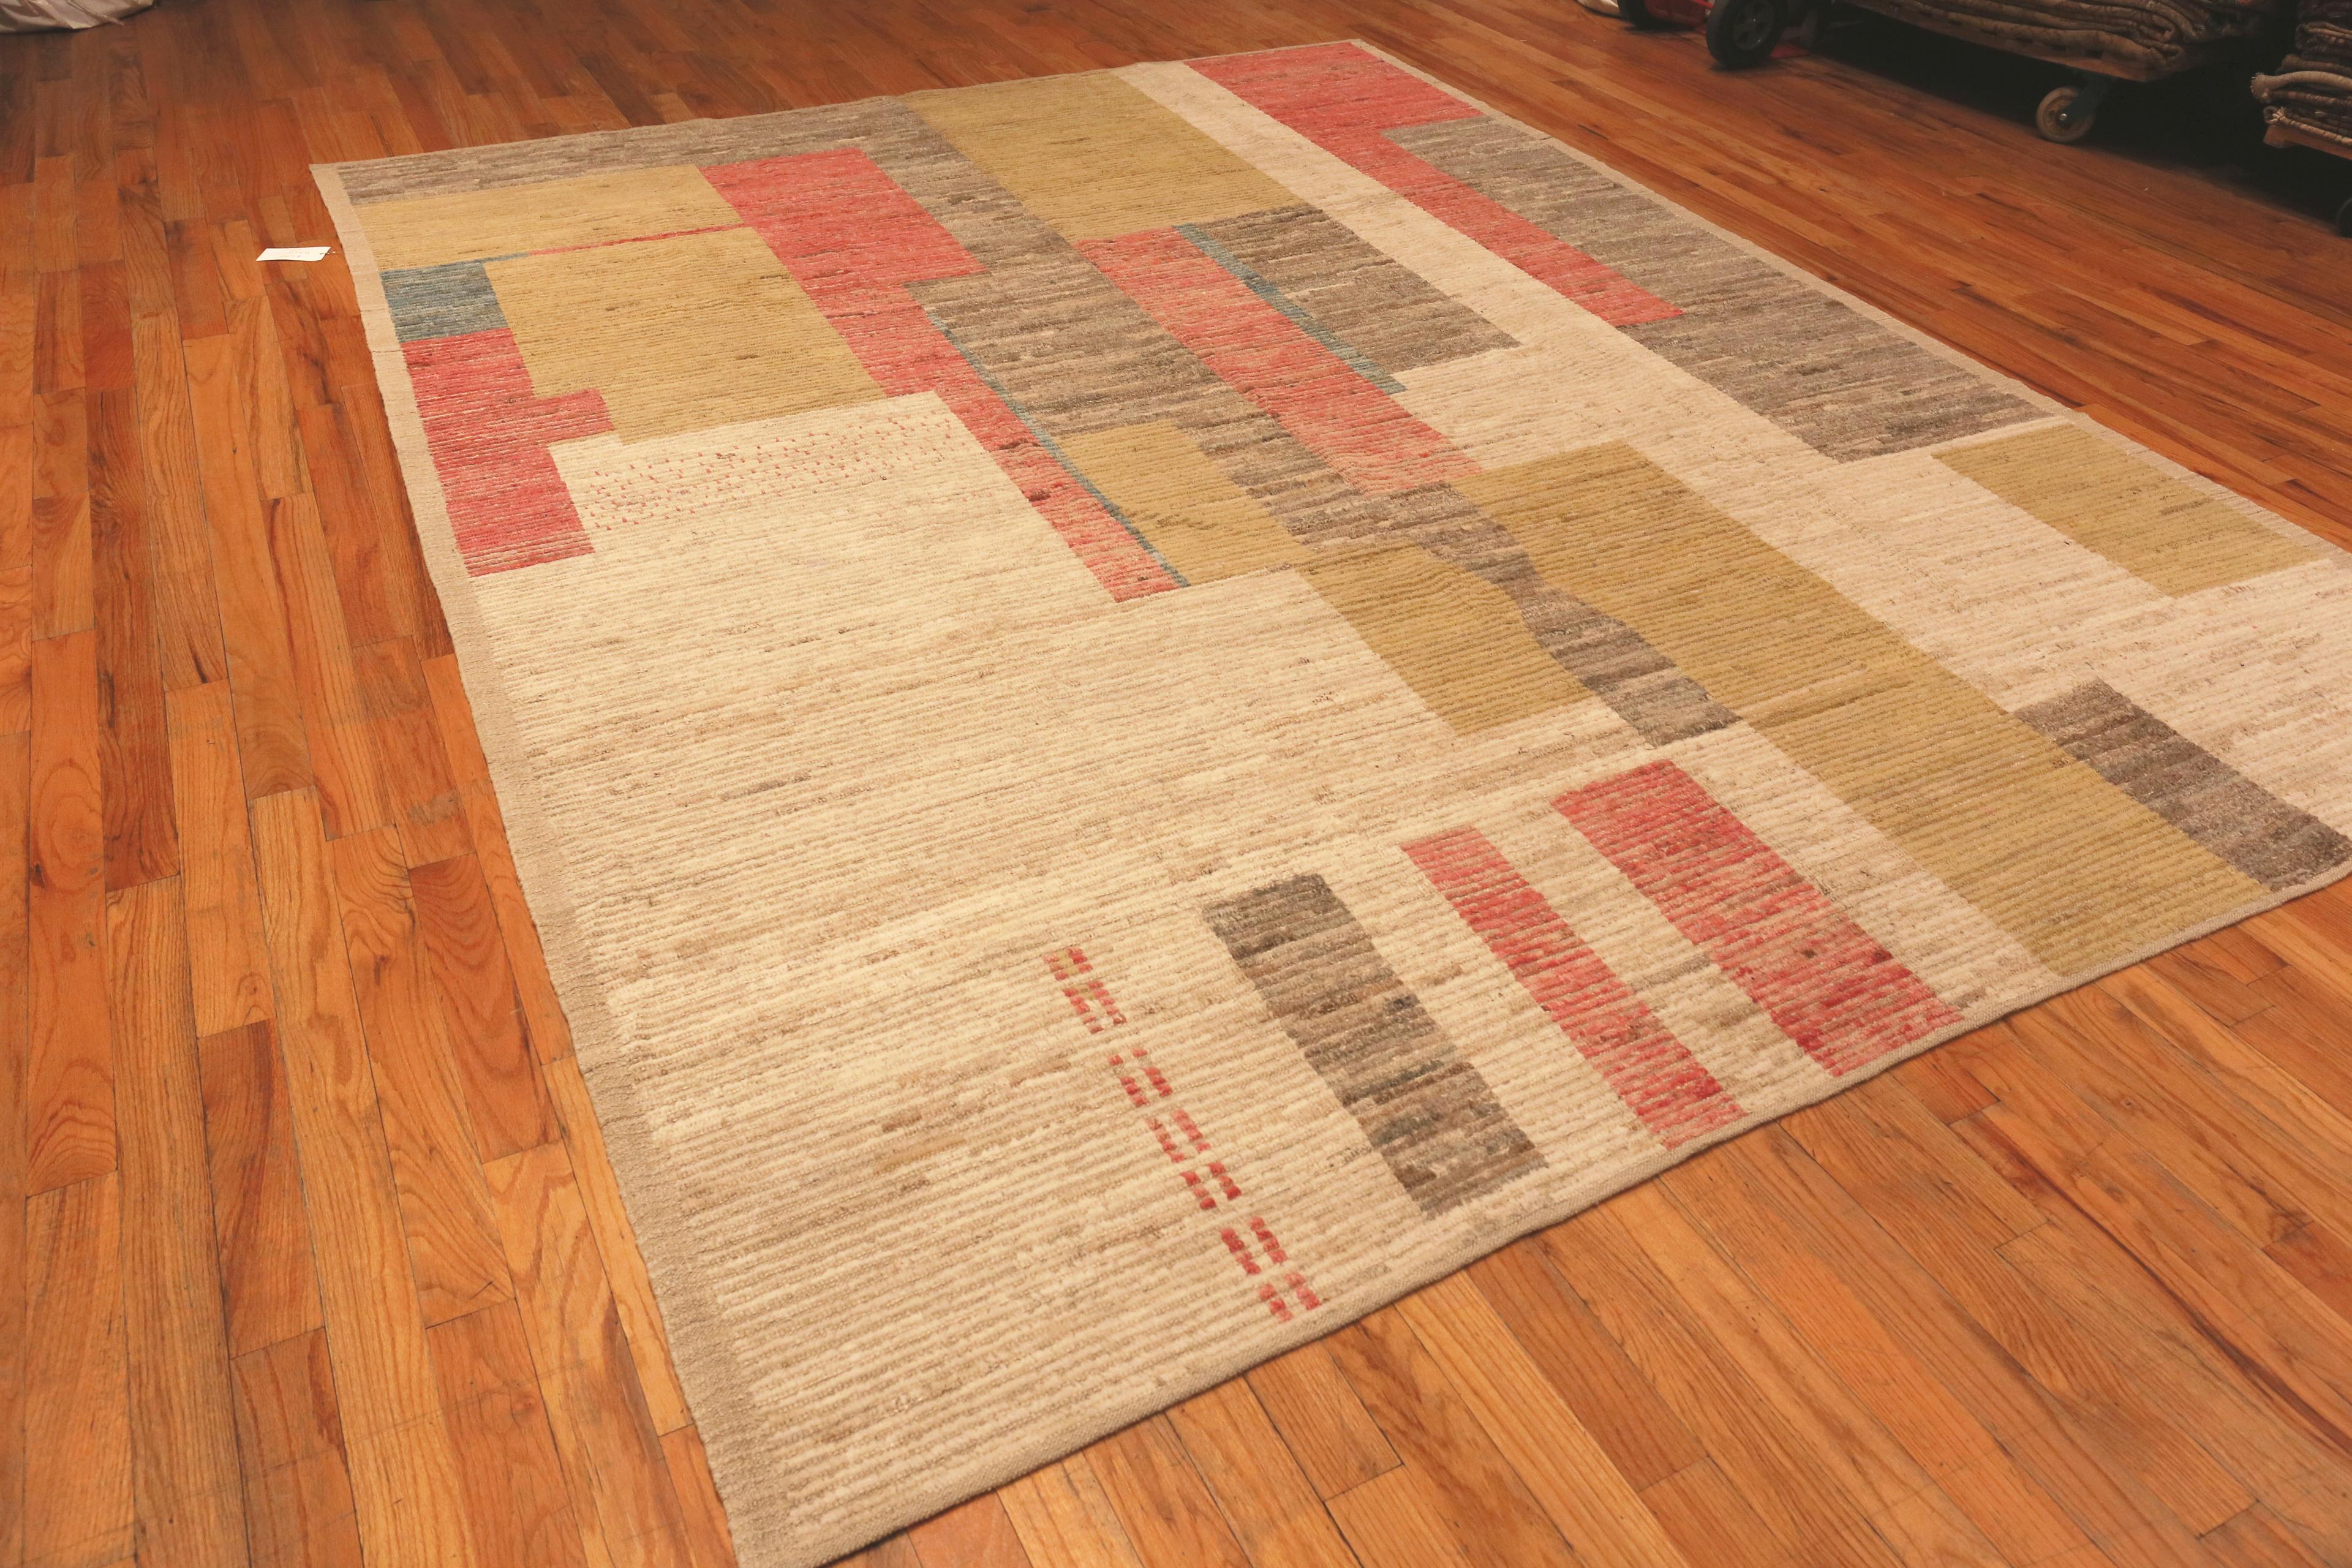 Colorful Modern Moroccan Area Rug, Country of Origin: Afghanistan. Circa date: Modern. Size: 9 ft 6 in x 12 ft (2.9 m x 3.66 m)